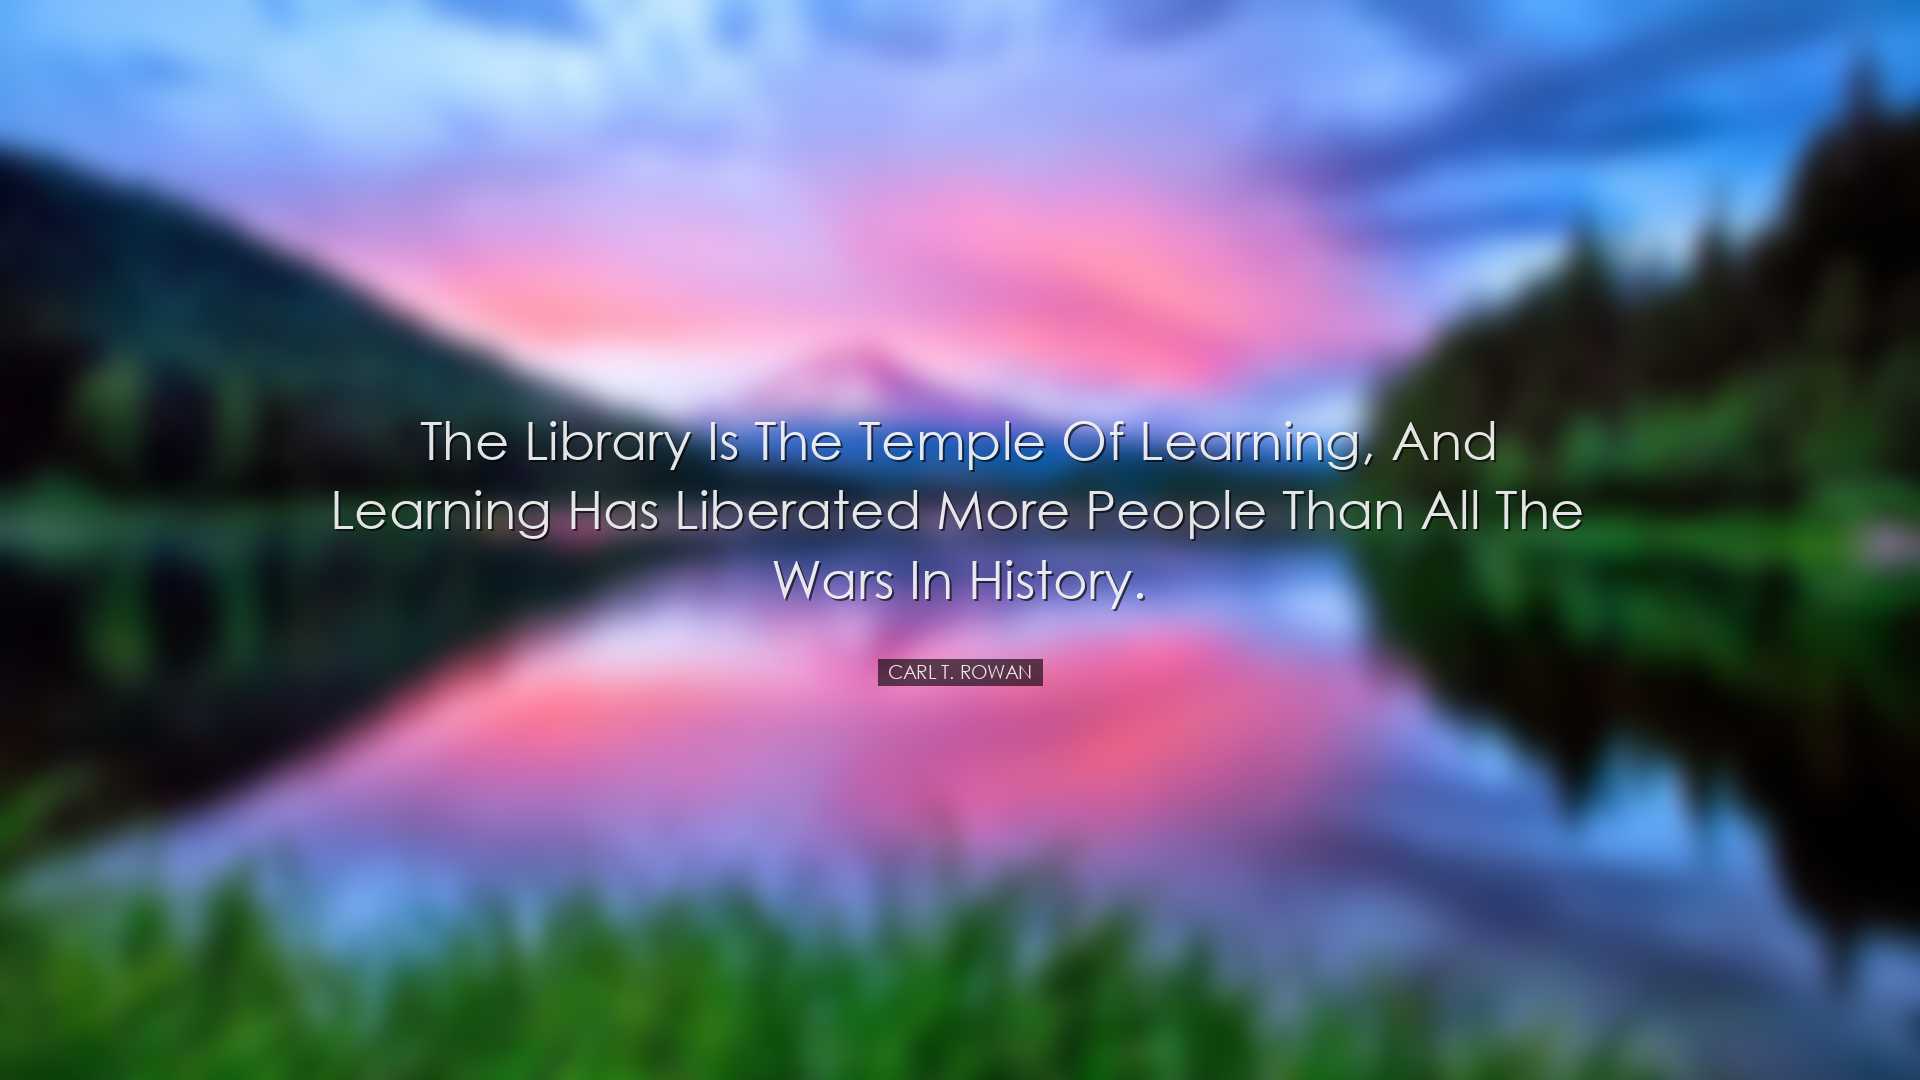 The library is the temple of learning, and learning has liberated